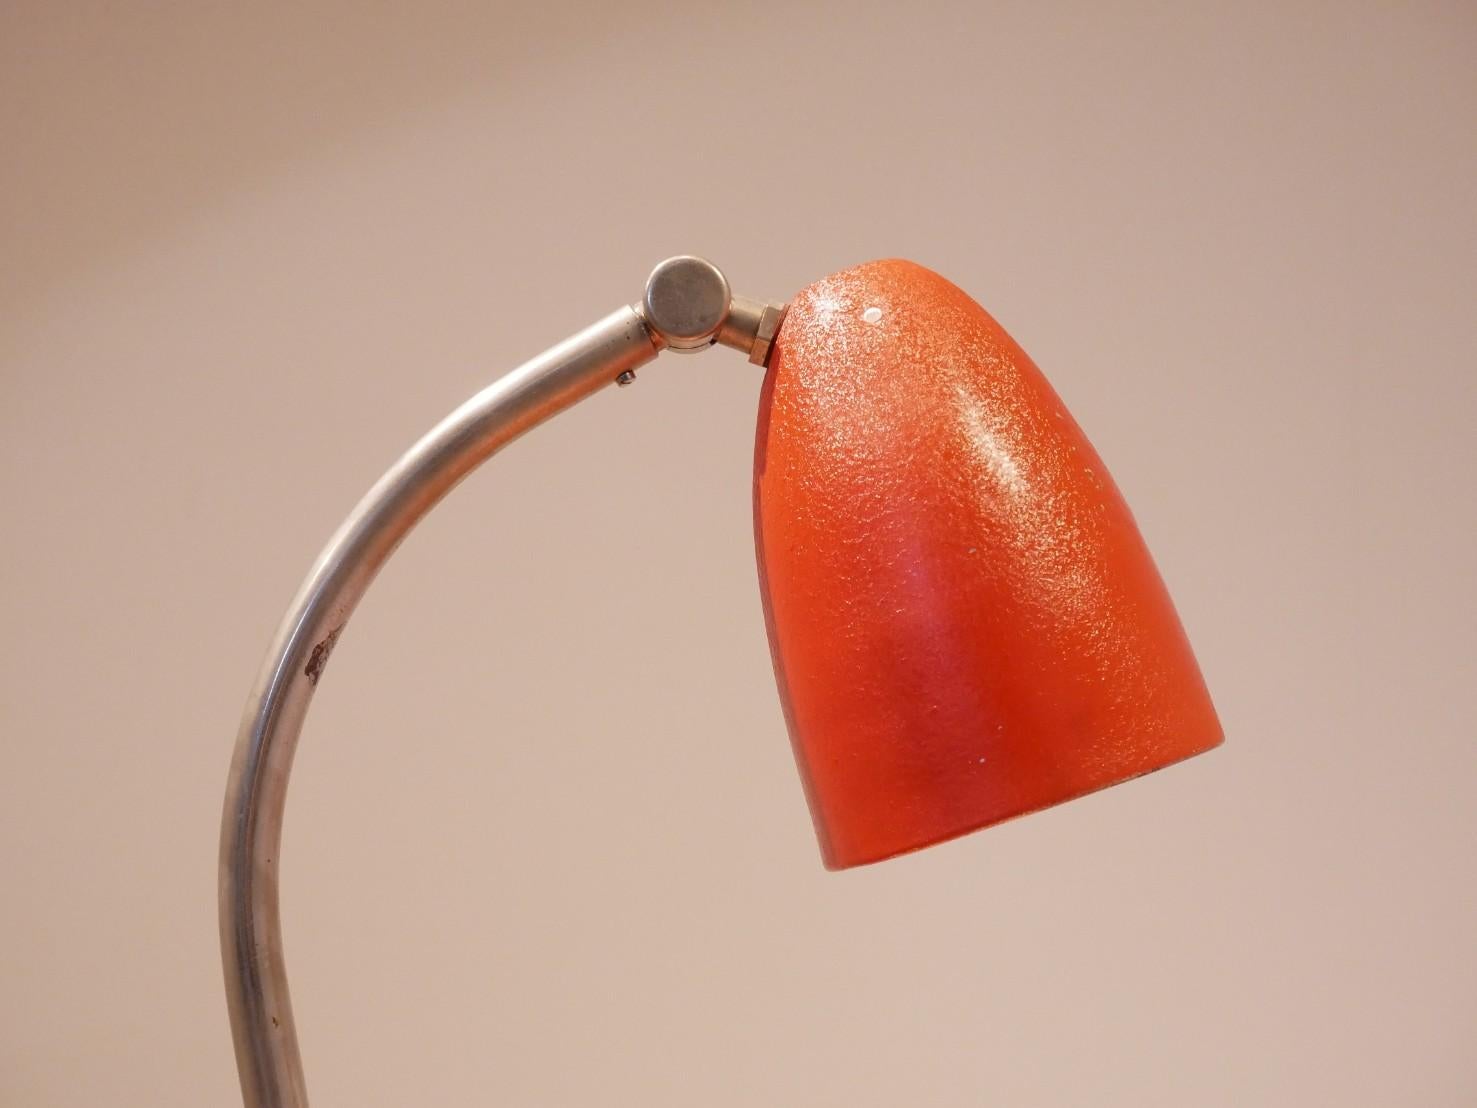 Late 1920s desk lamp, produced by Gispen, original red paint with nickelled metal elements.